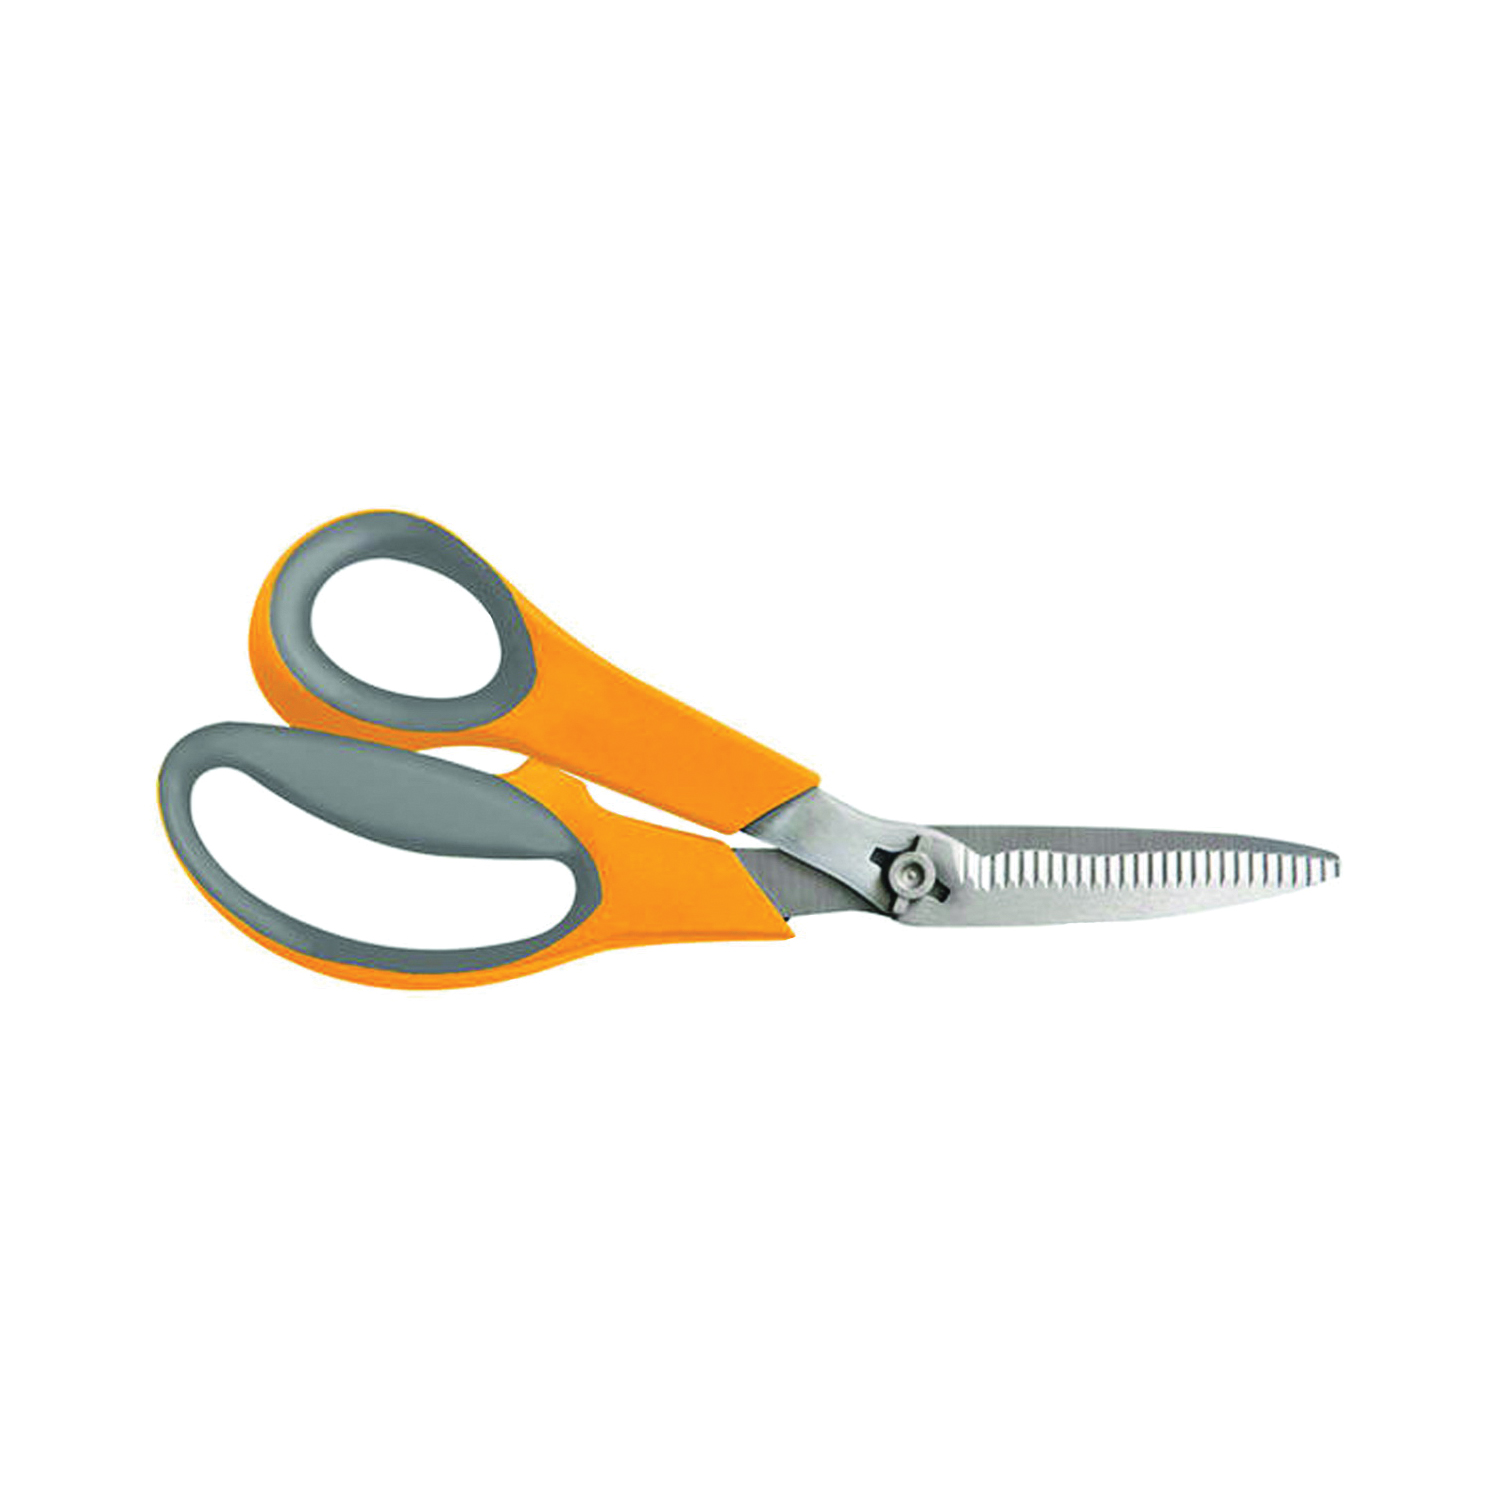 96086966 Pruning Shear, 8 in Cutting Capacity, Stainless Steel Blade, Ergonomic, Soft-Grip Handle